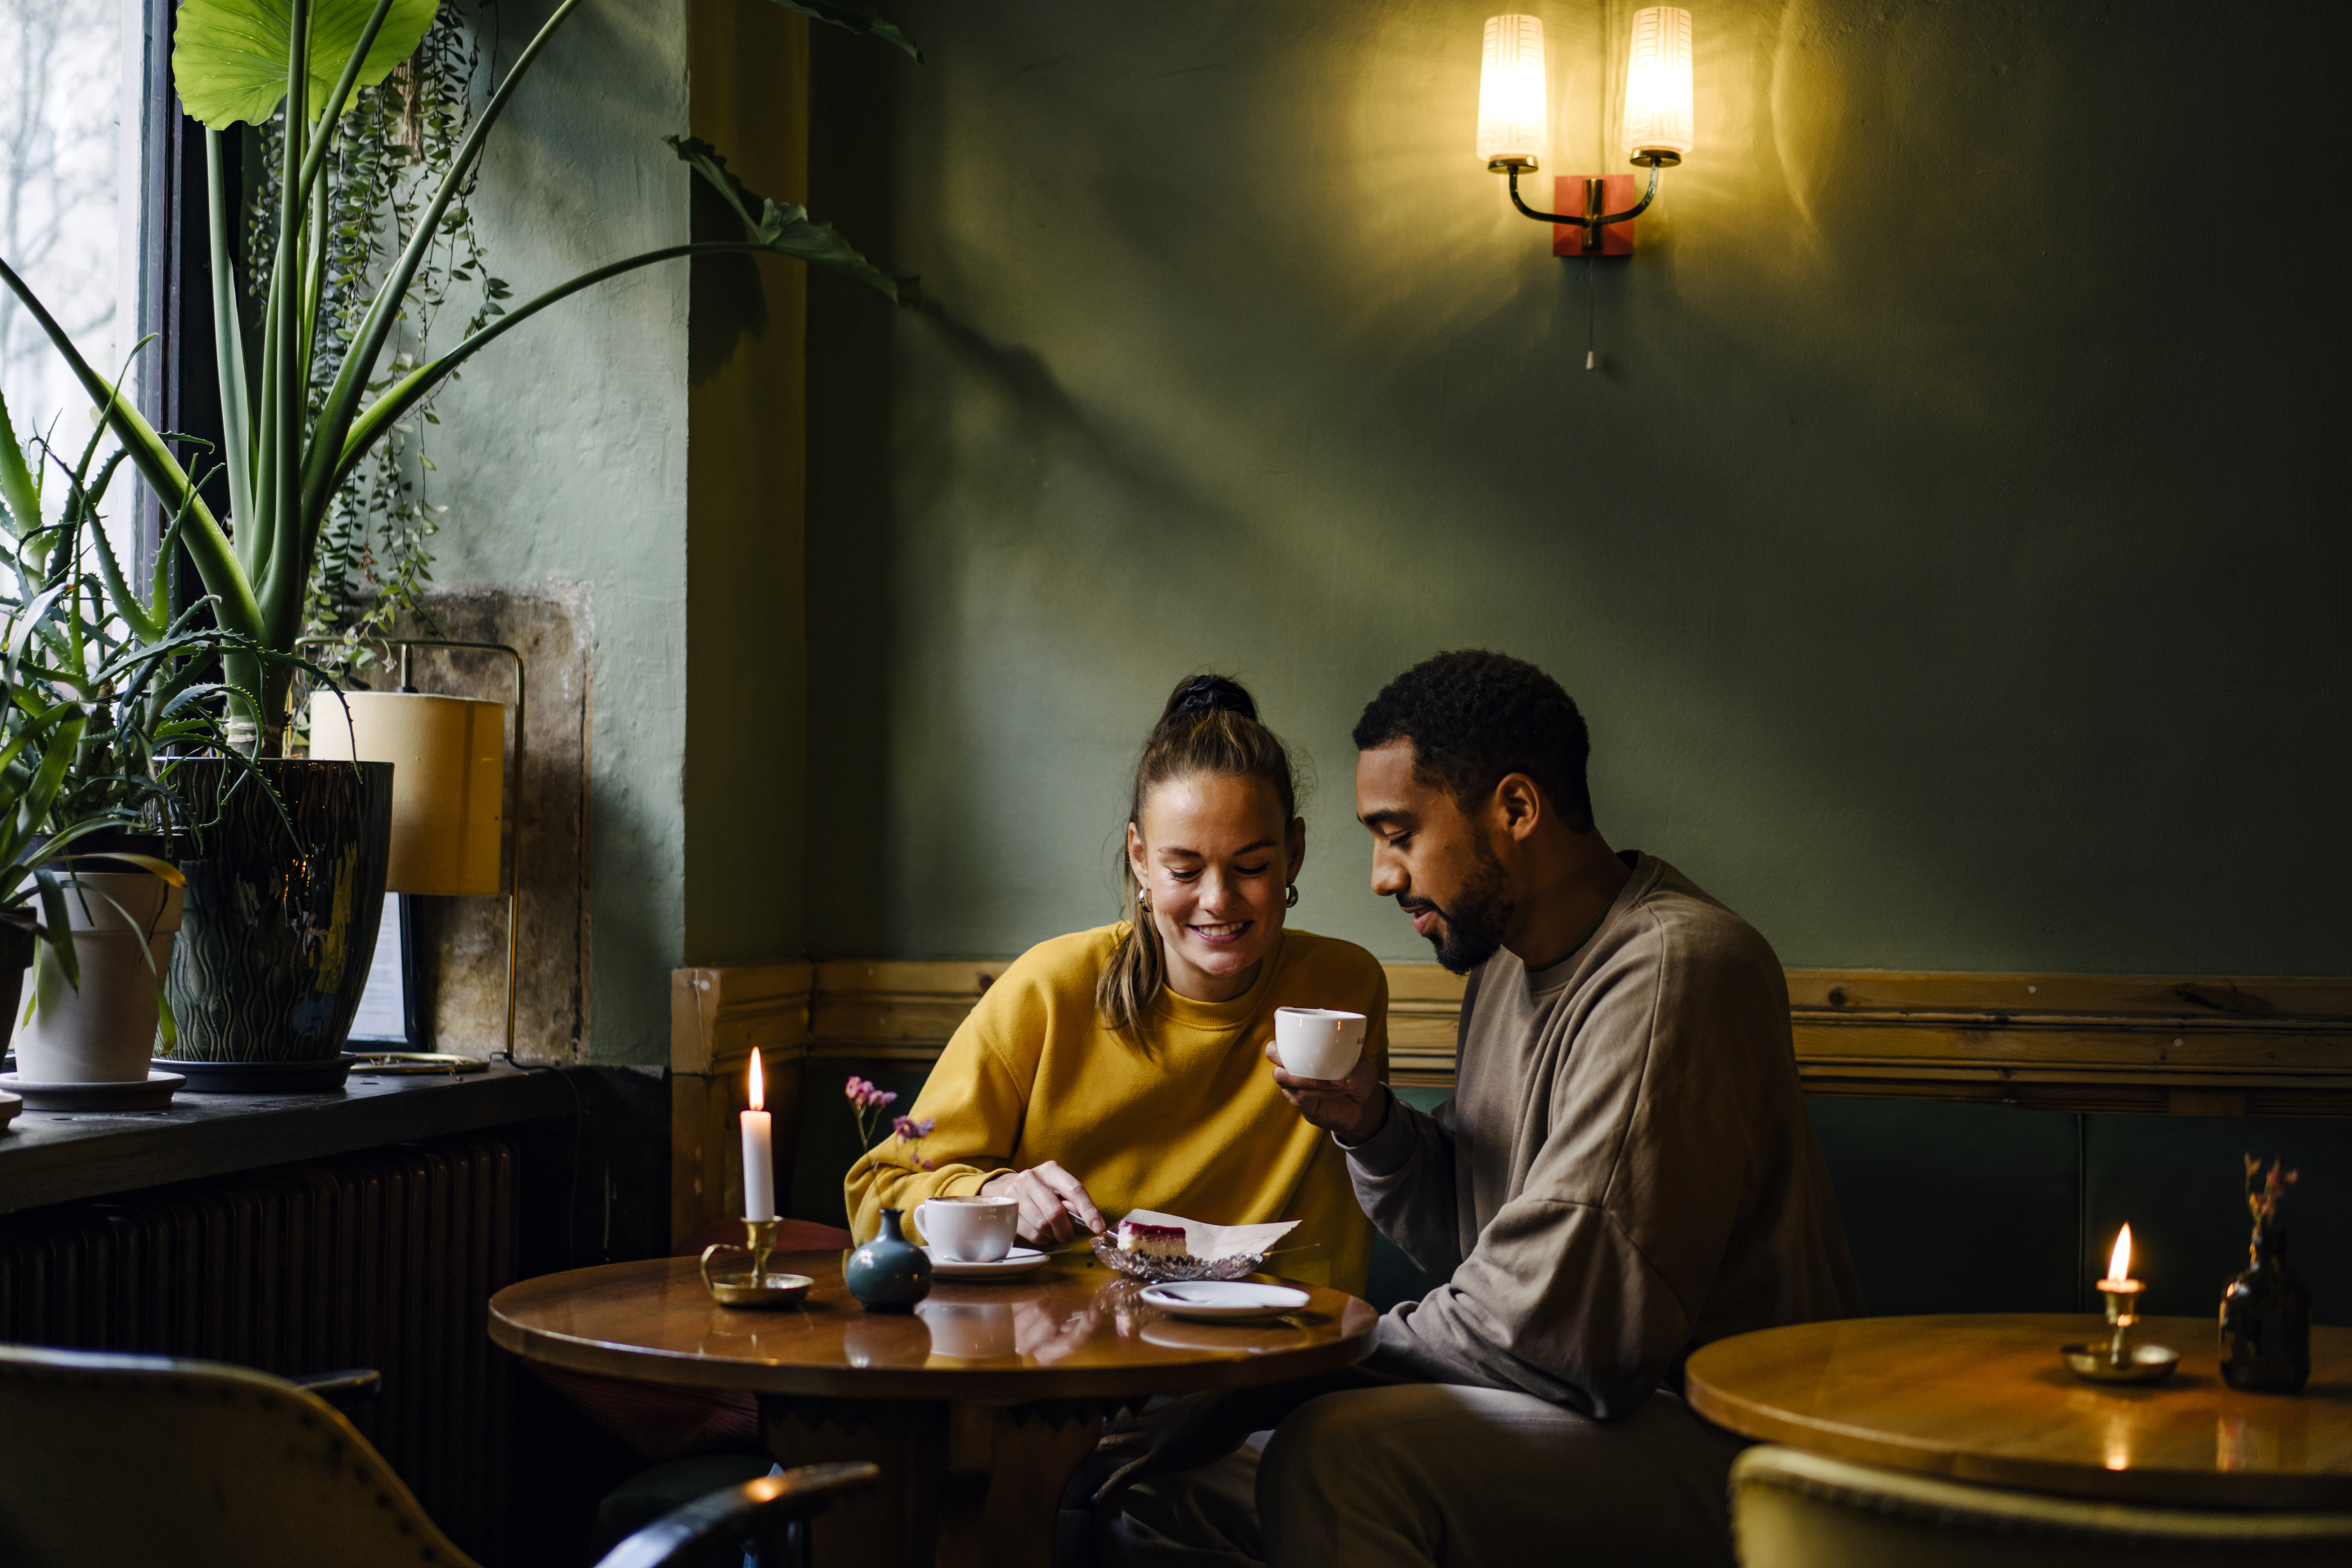 A couple sharing a dessert in a cafe | Source: Shutterstock